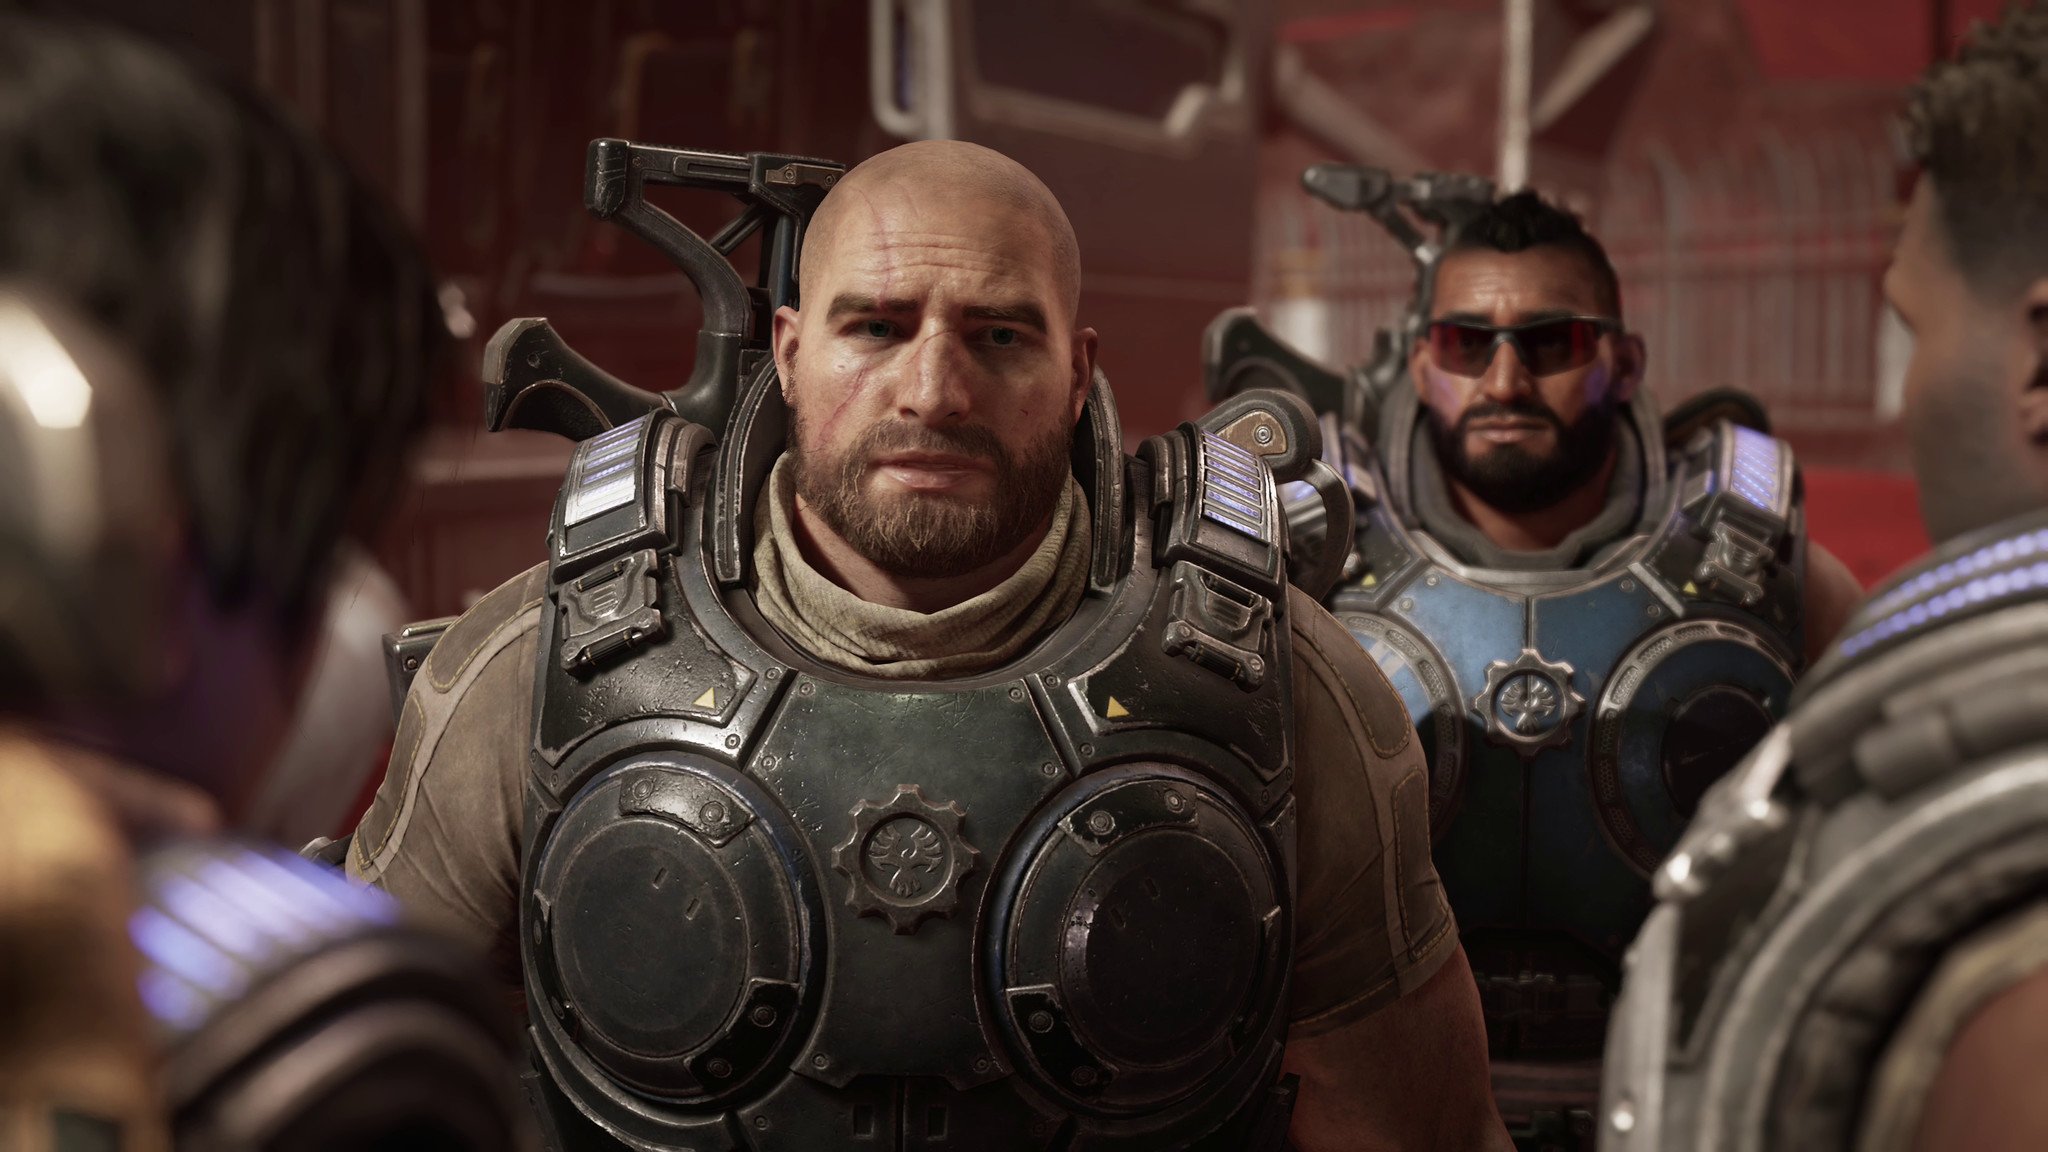 Gears 5' update aims to completely relaunch multiplayer